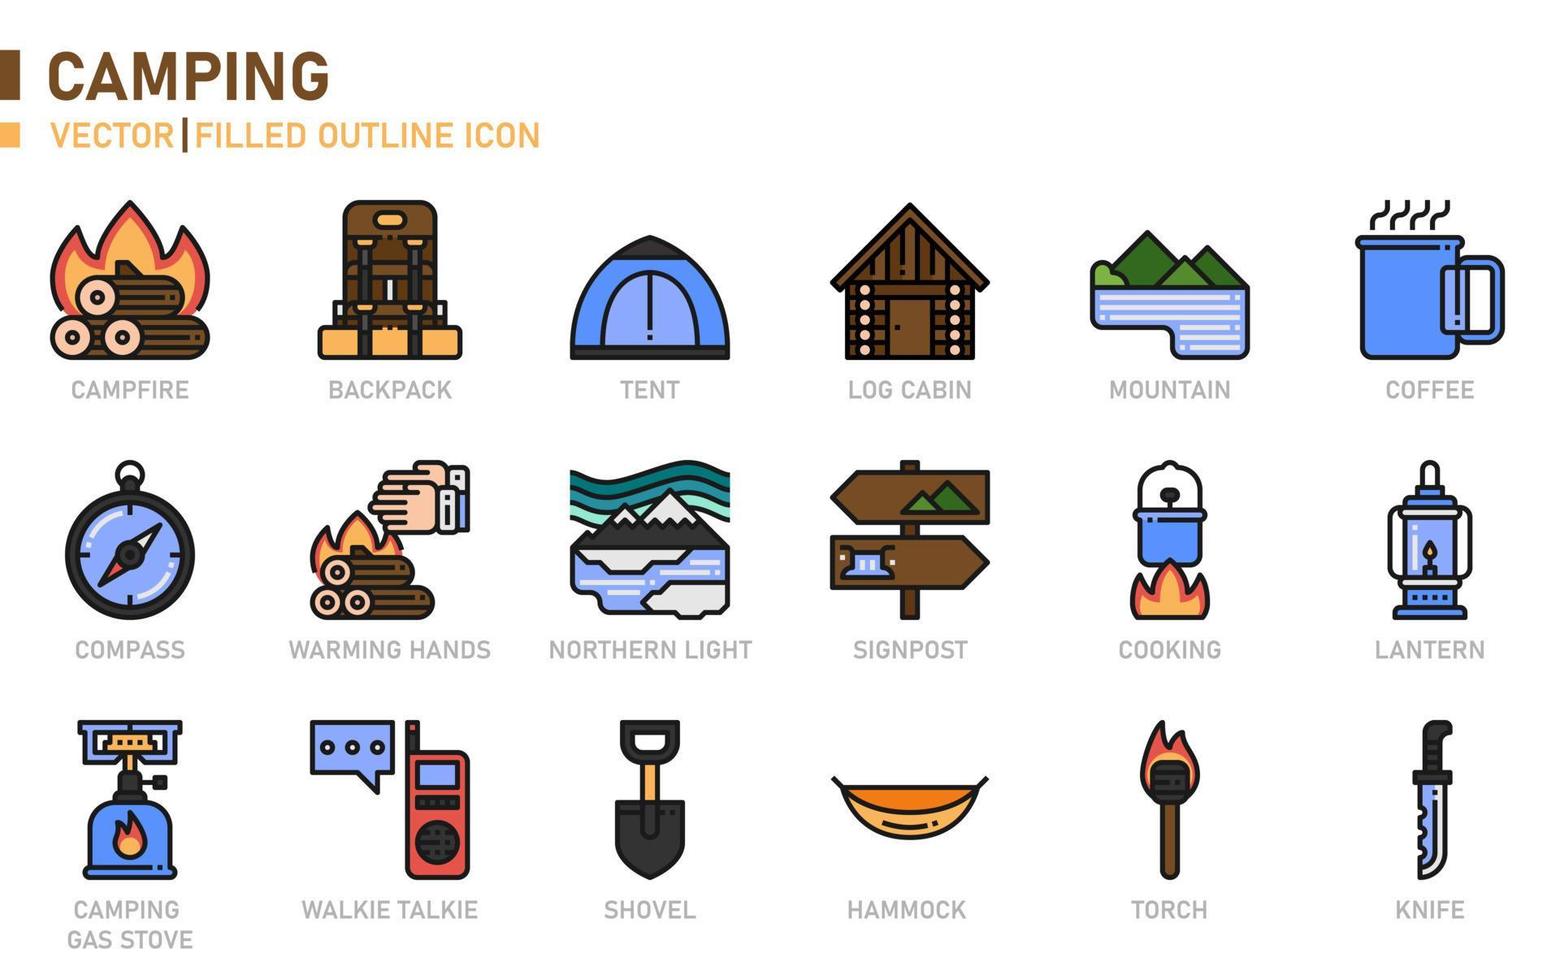 Camping Filled Outline Icon vector